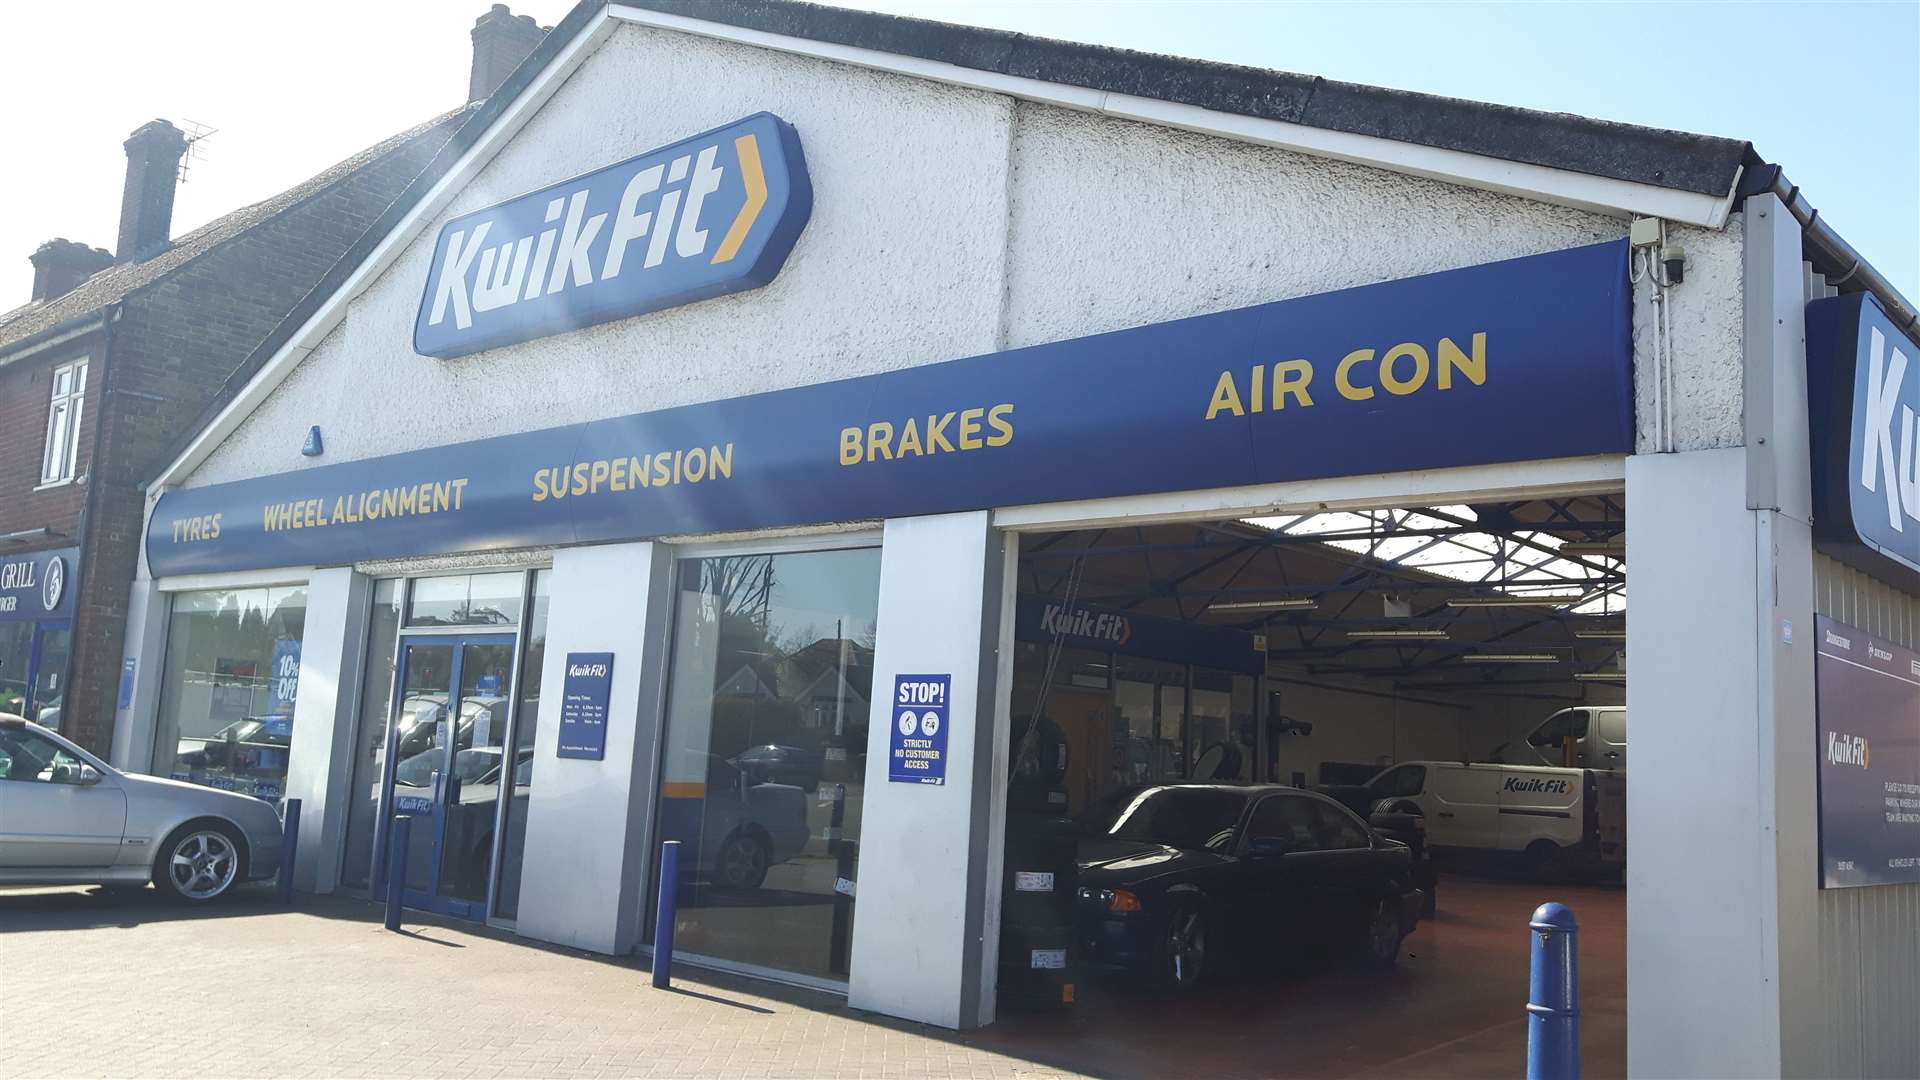 Kwik Fit in Loose Road , Maidstone, was open, but with not much trade